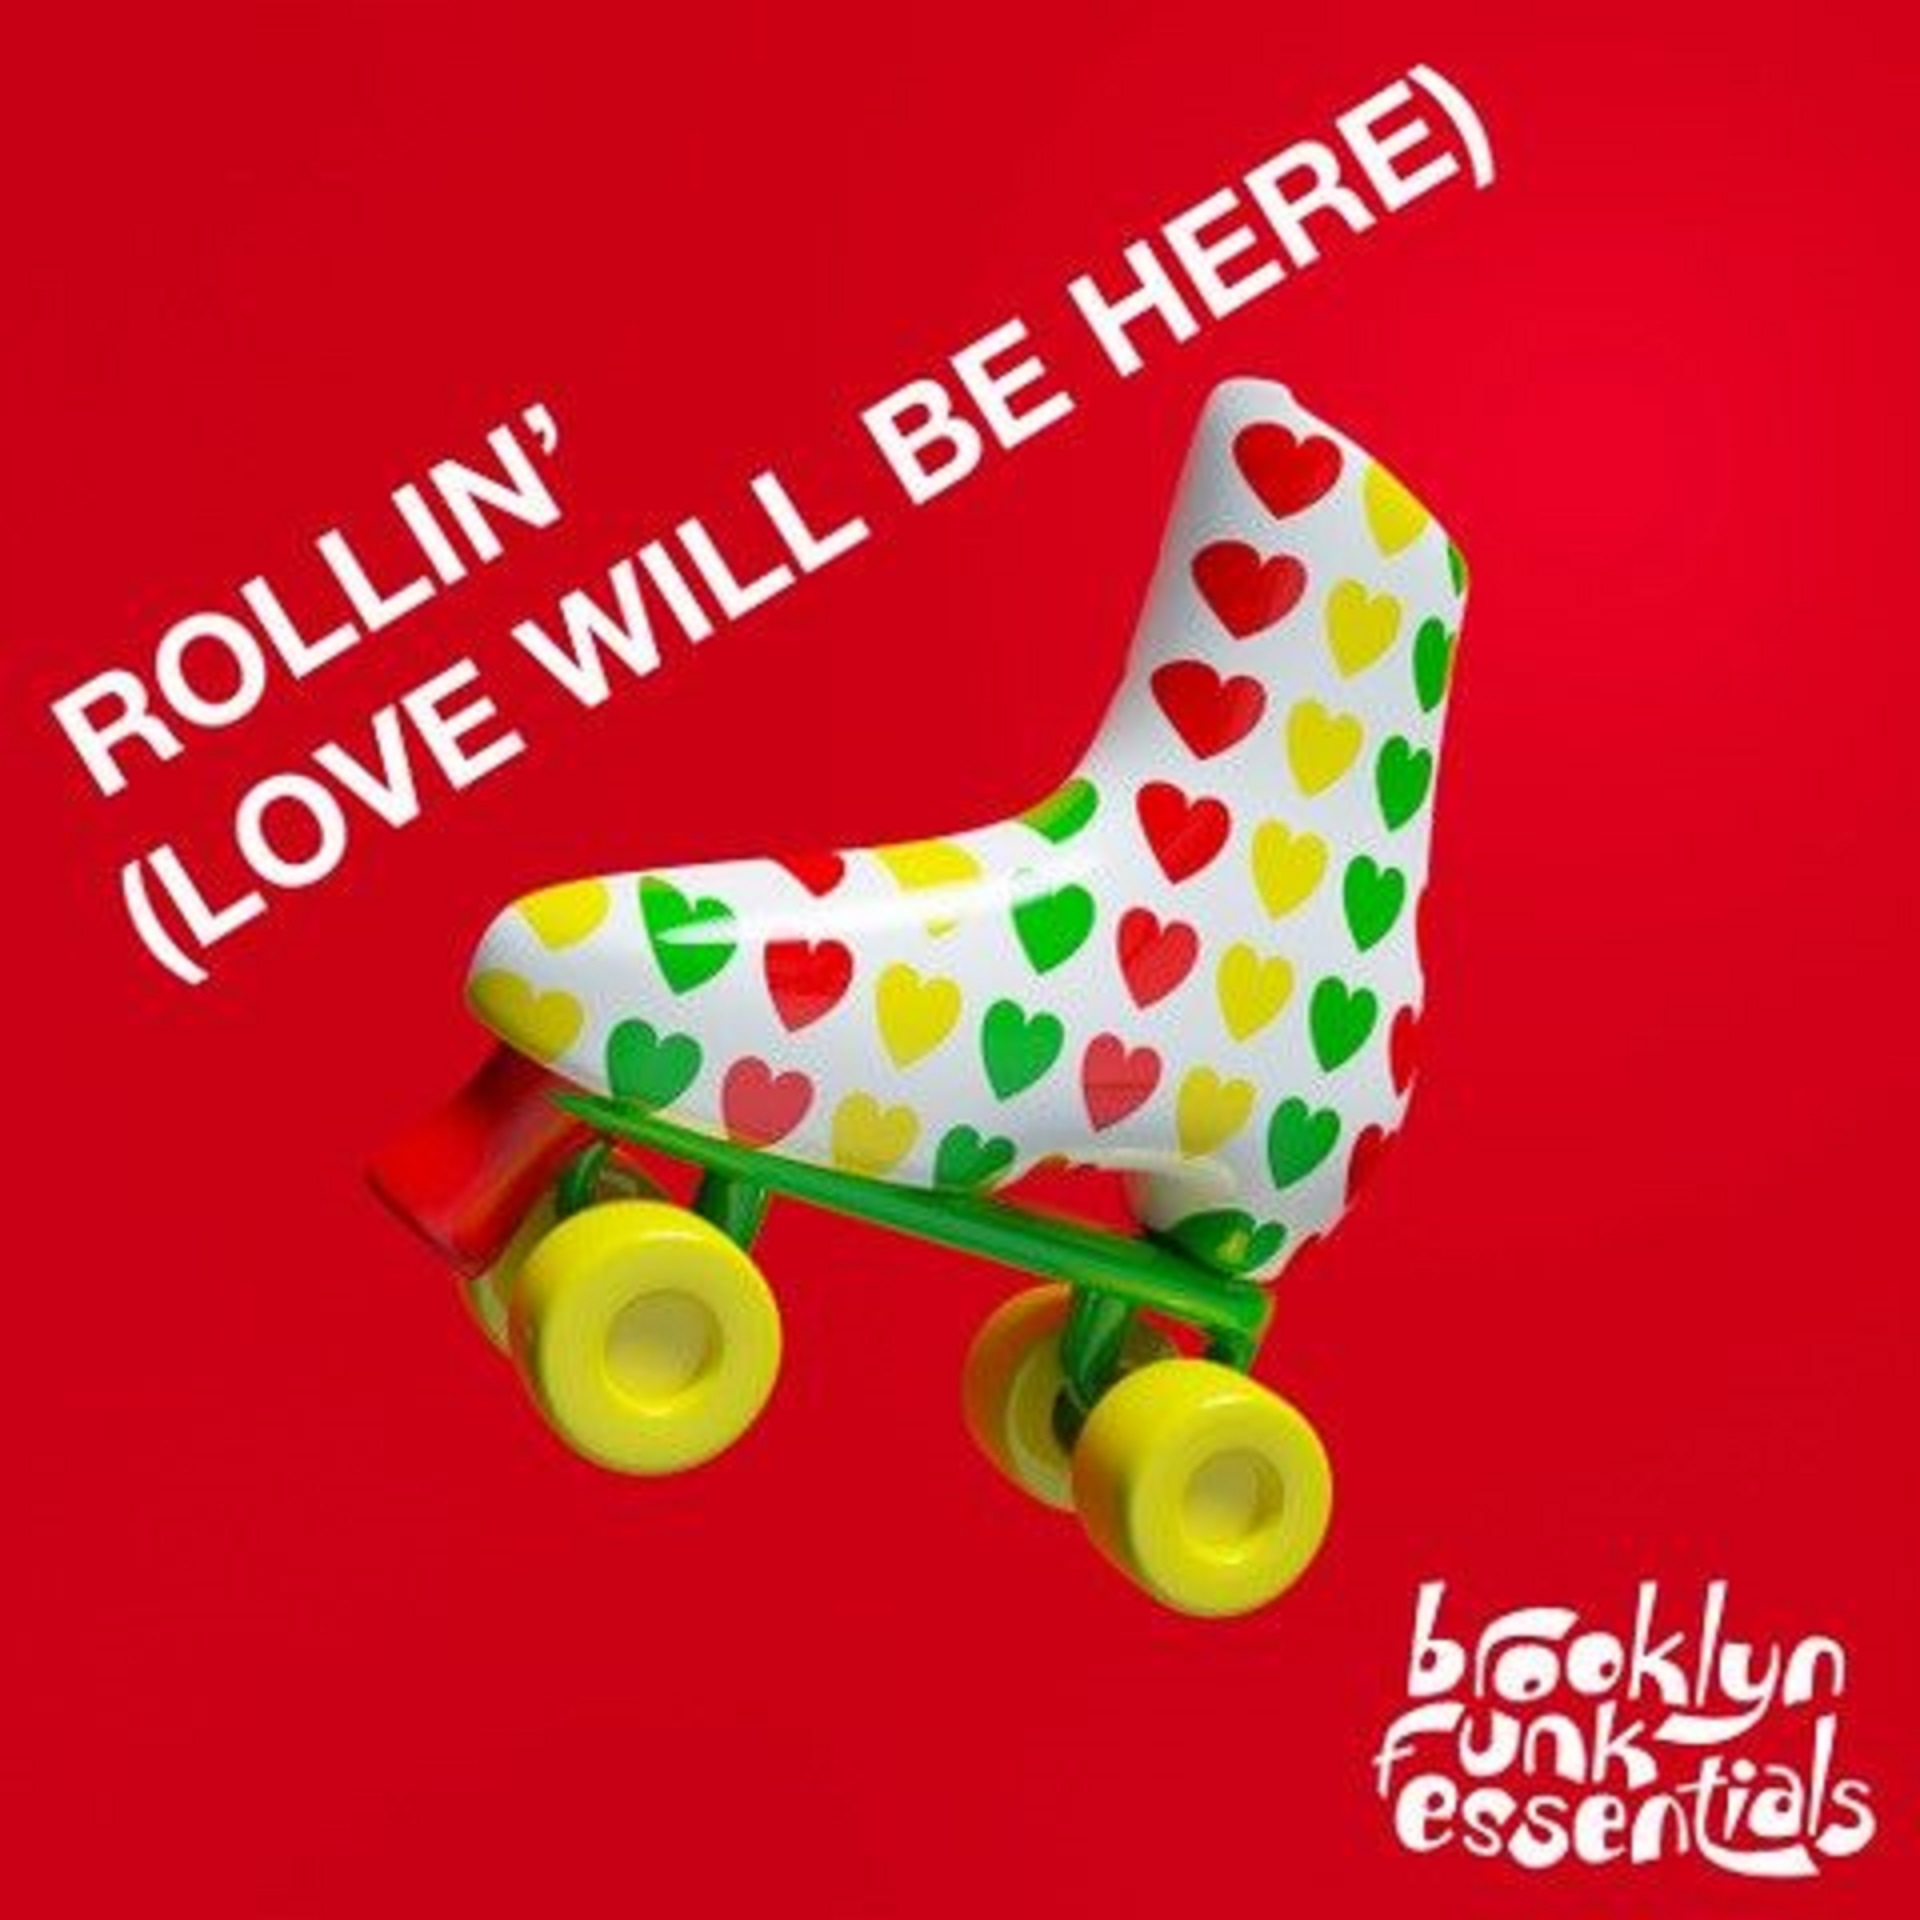 BROOKLYN FUNK ESSENTIALS New single - Rollin’ (Love Will Be Here) Out today